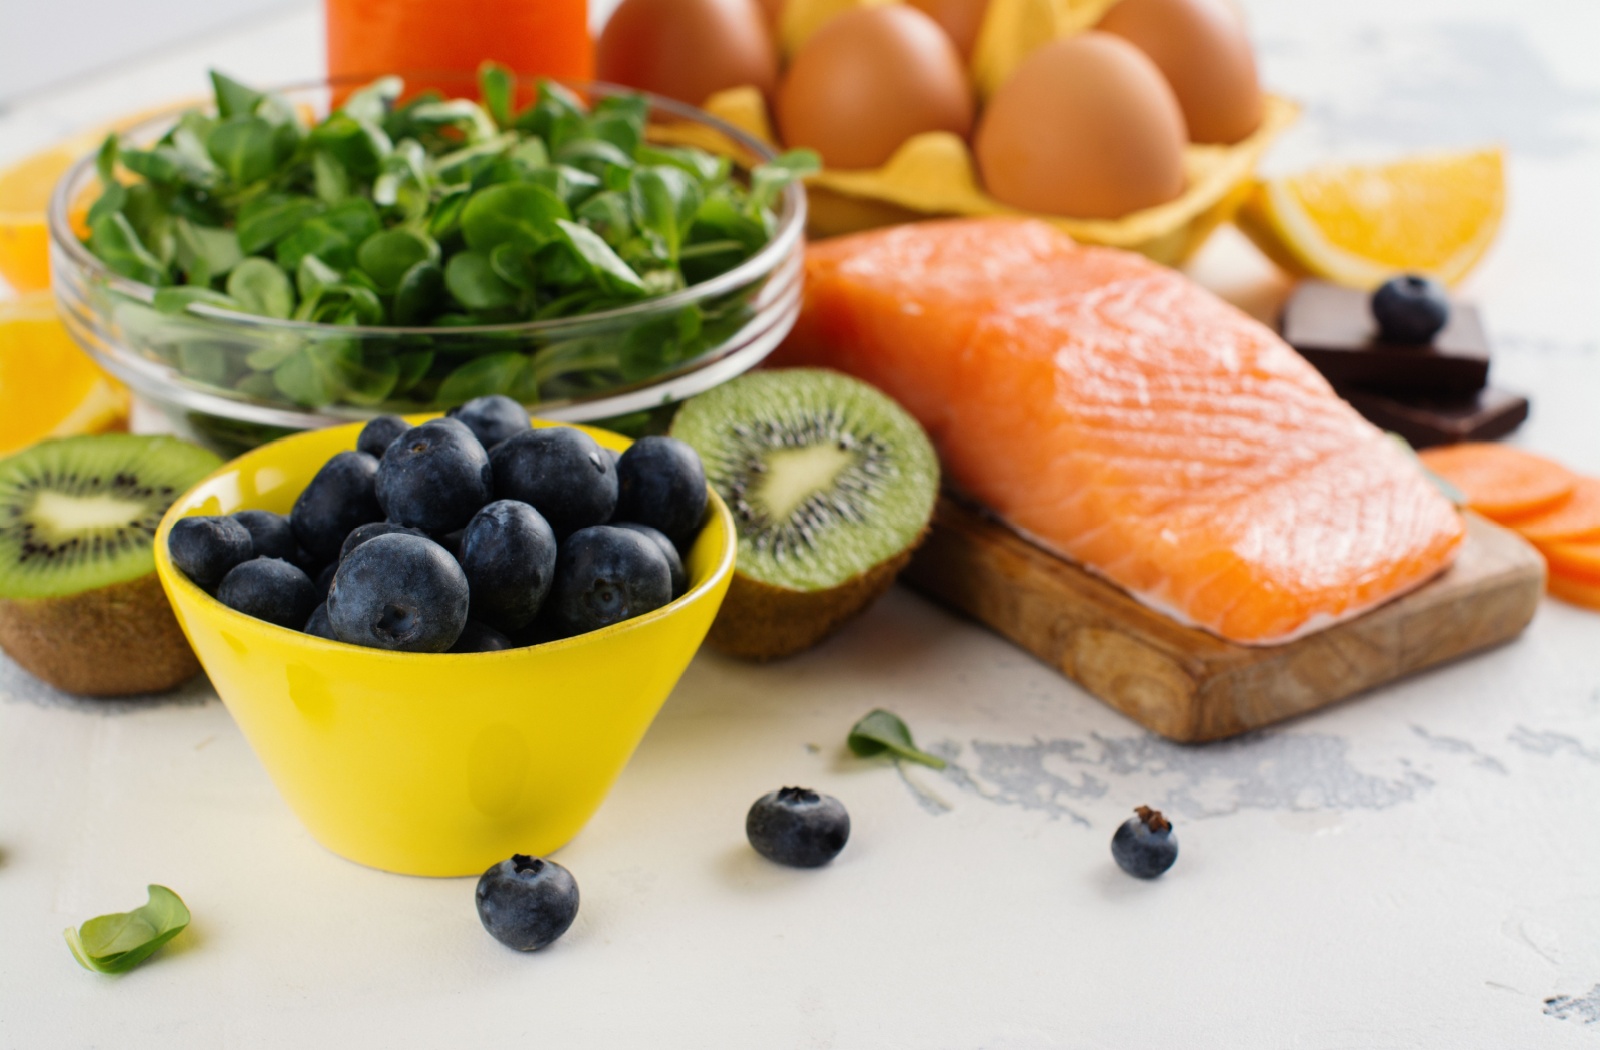 A selection of fruits, vegetables, and fish containing vitamins and minerals important for eye health.